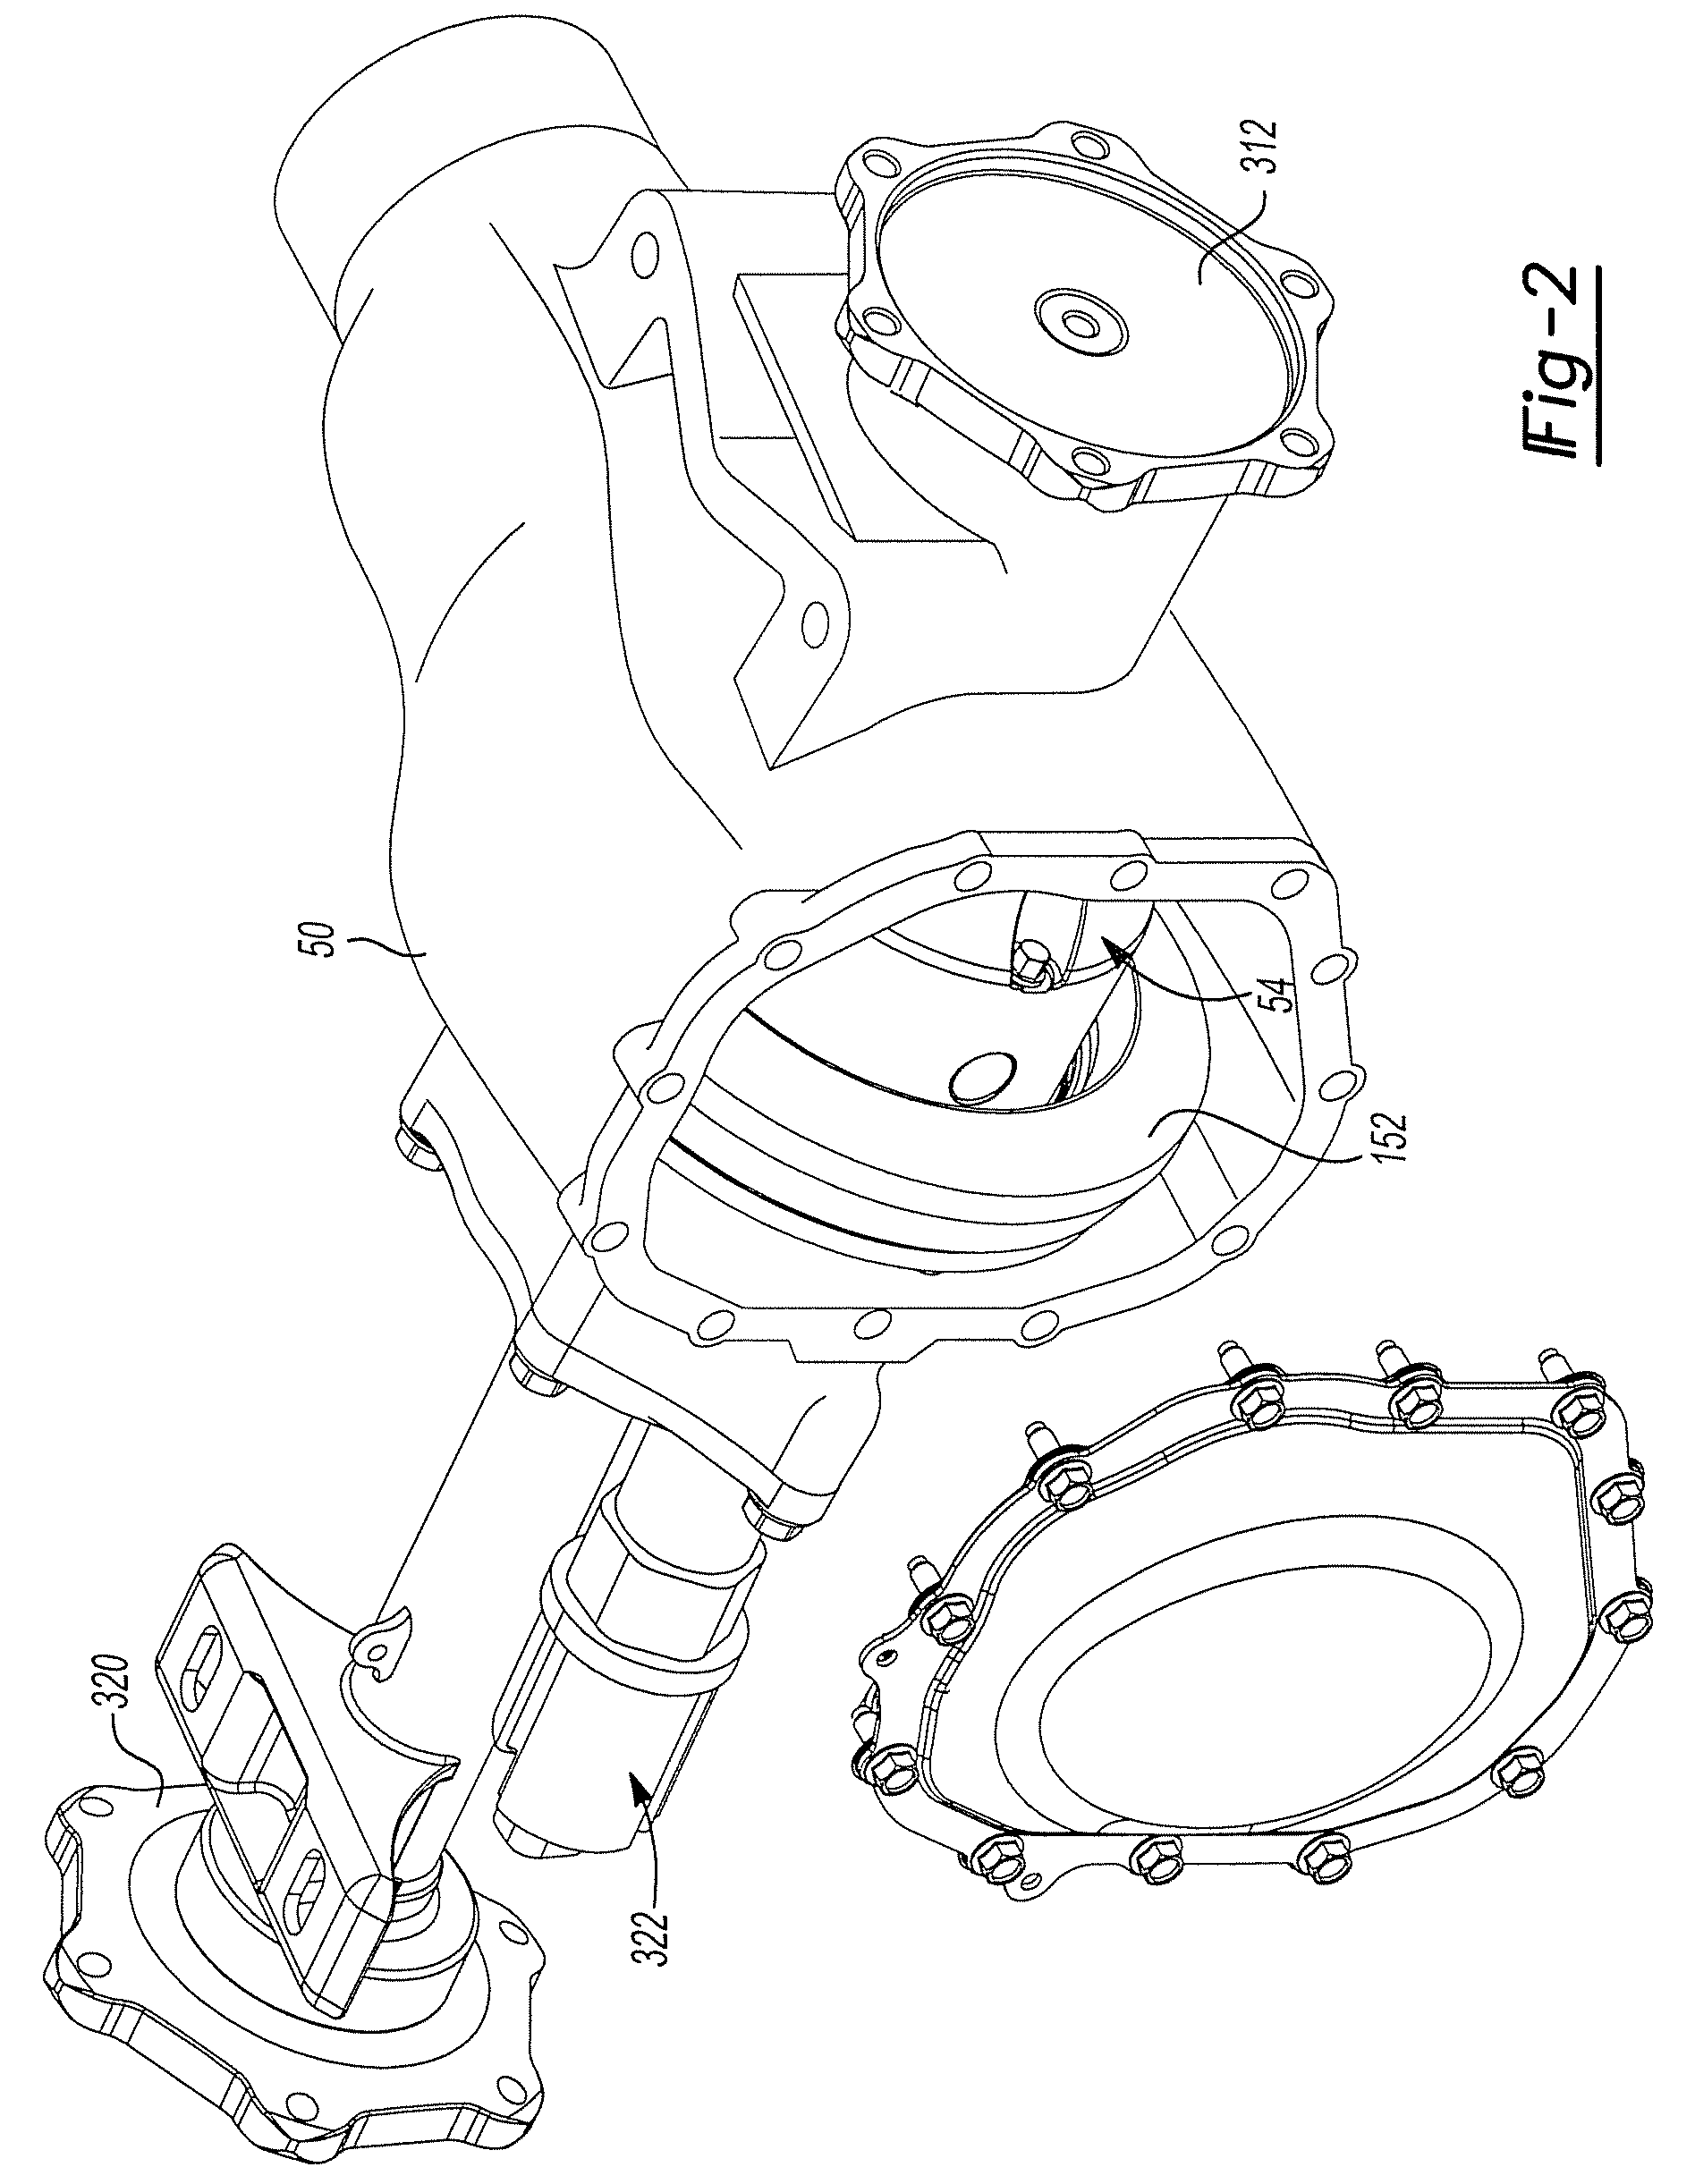 Differential and bearing arrangement